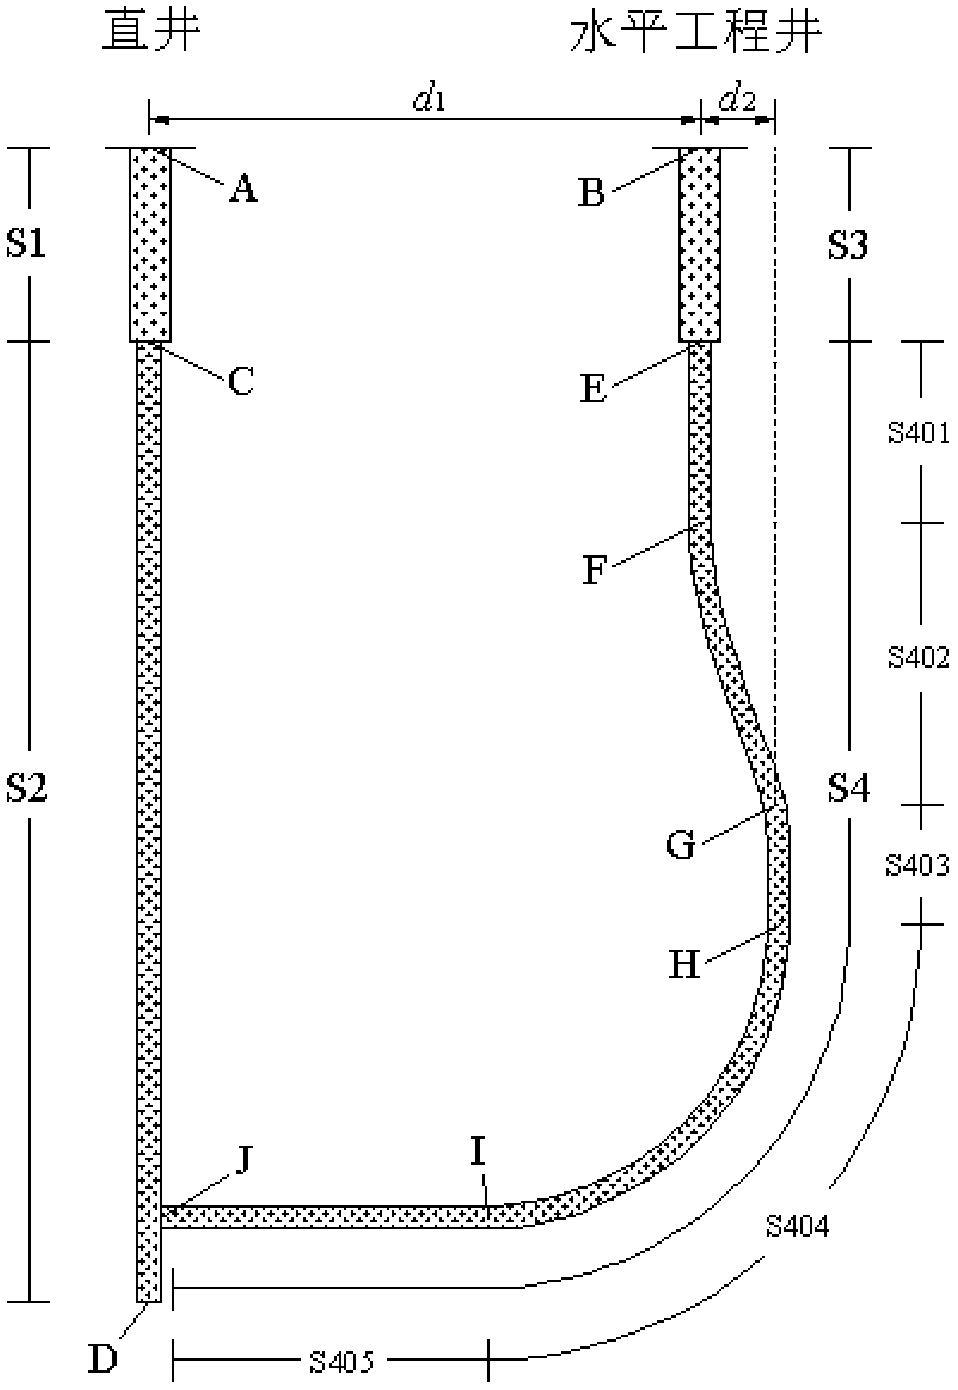 Vertical well negative displacement based horizontal butt-joint type geothermal well borehole trajectory and designing method